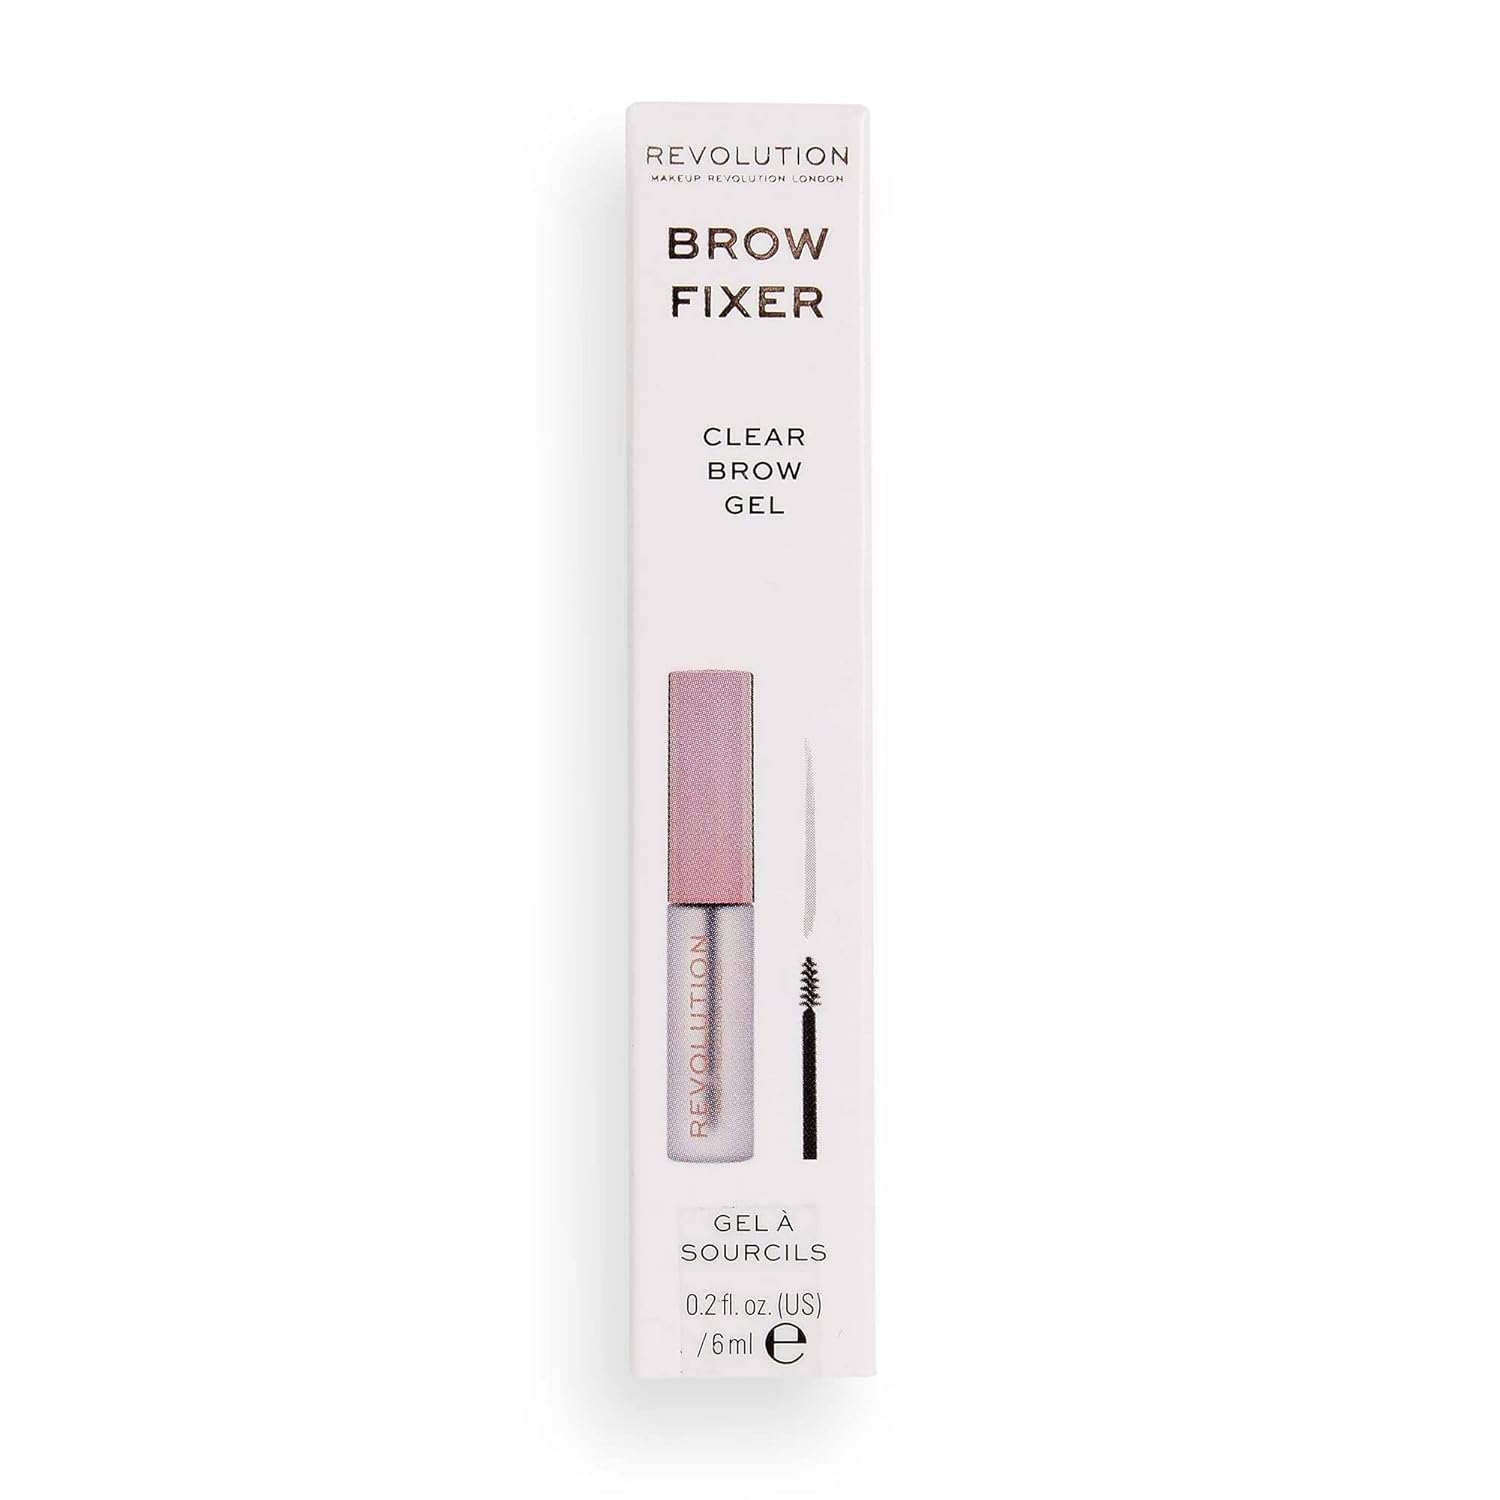 Makeup Revolution Clear Eyebrow Gel For Taming Your Brows, Brow Fixer, Cruelty-Free, 0.2./6ml